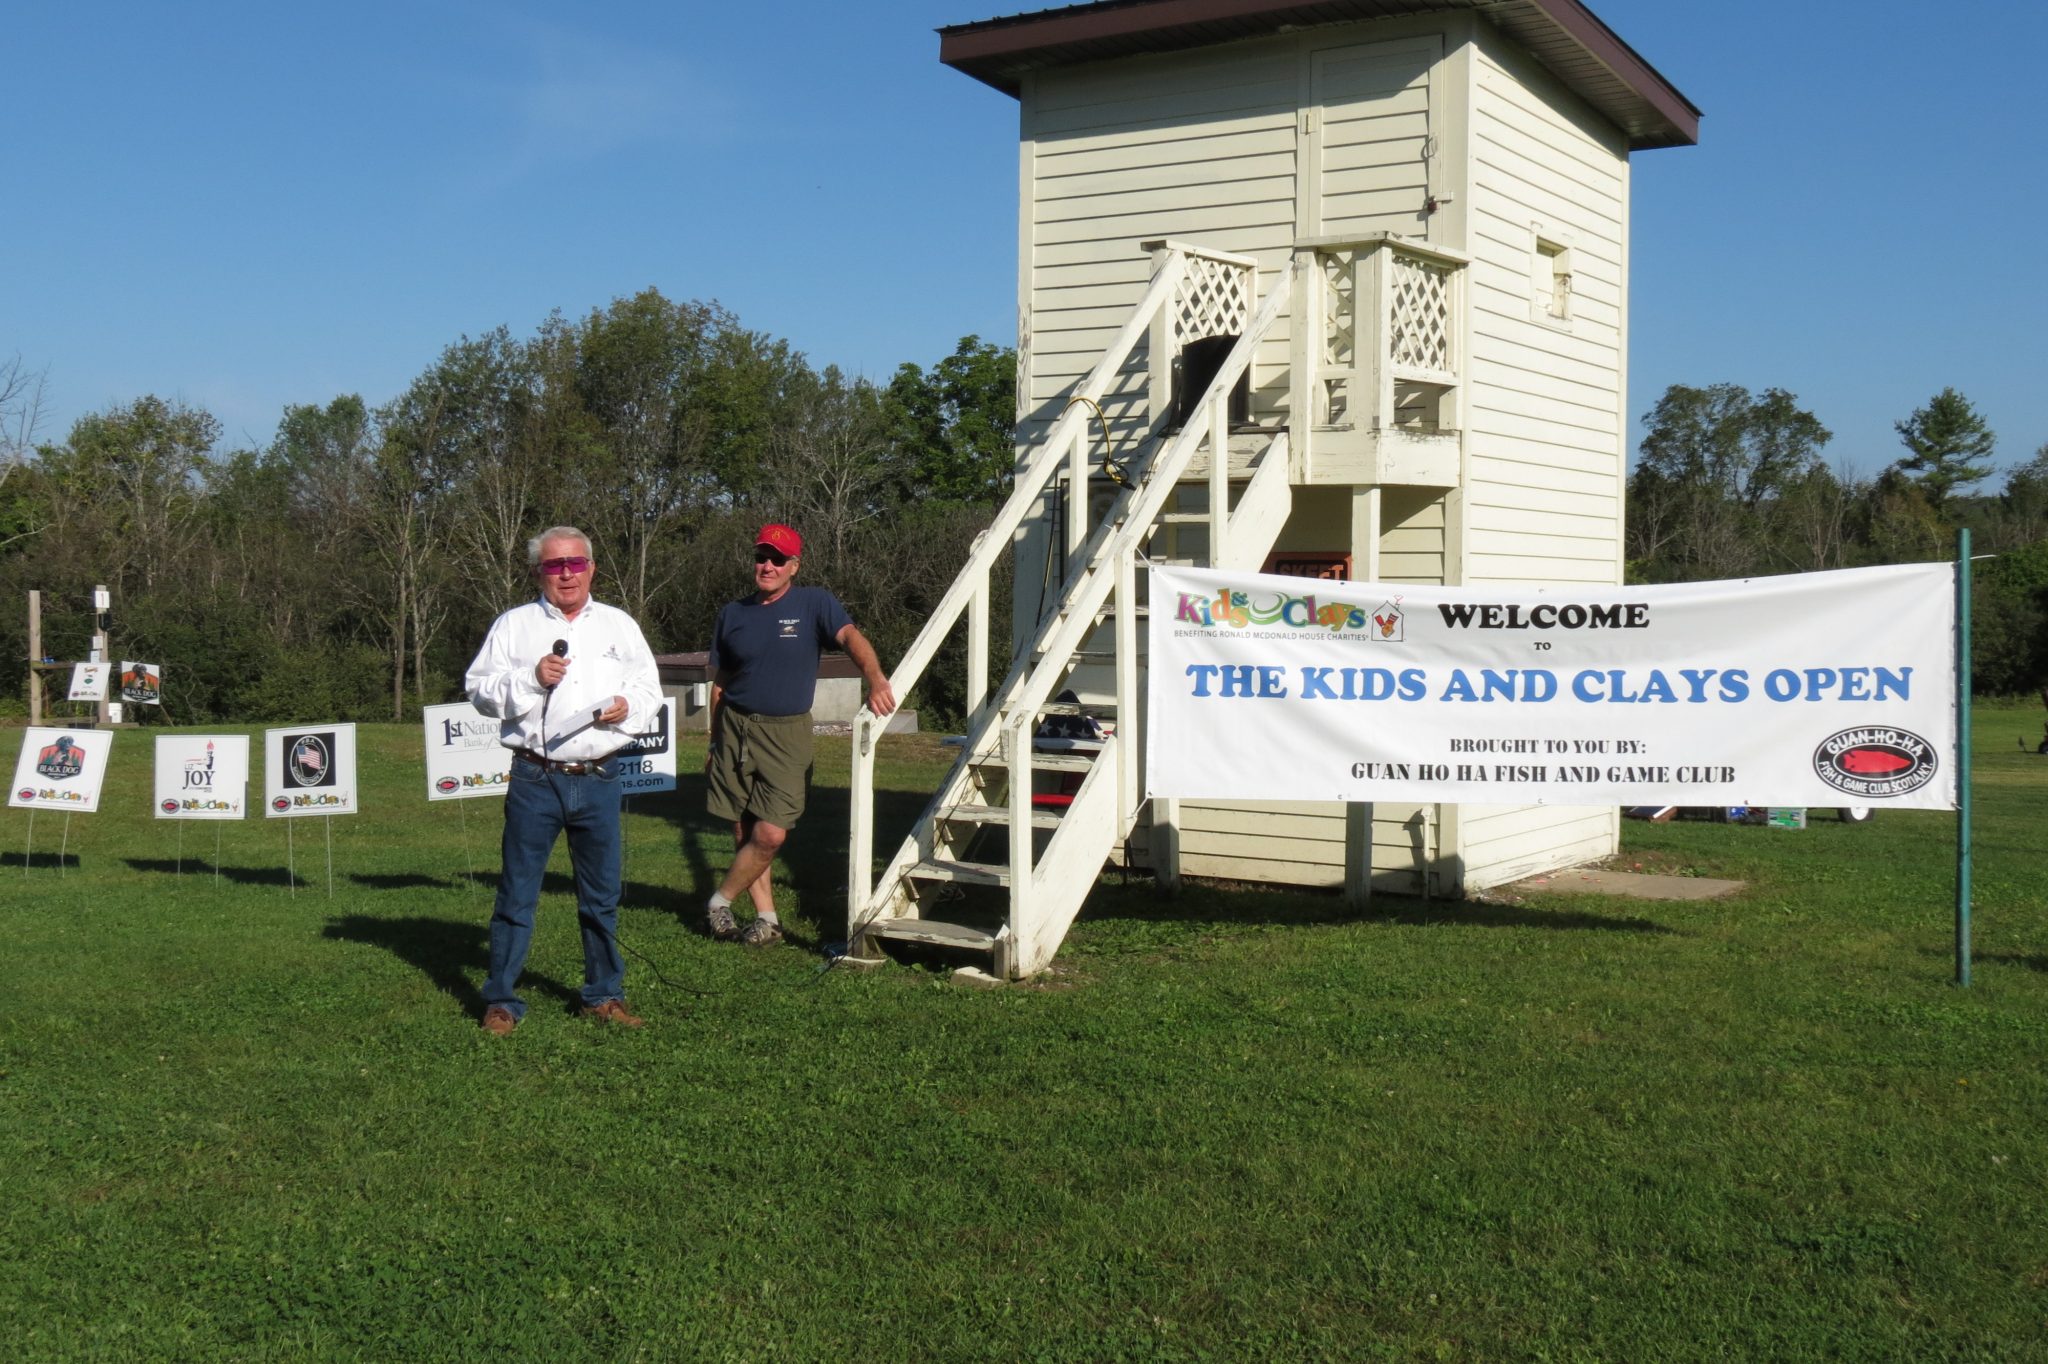 Kids & Clays Open event co-founder and Guan Ho Ha Club member Steve Borst watches as the Kids & Clays Foundation President, Bill Keyser, addresses the crowd before the event begins